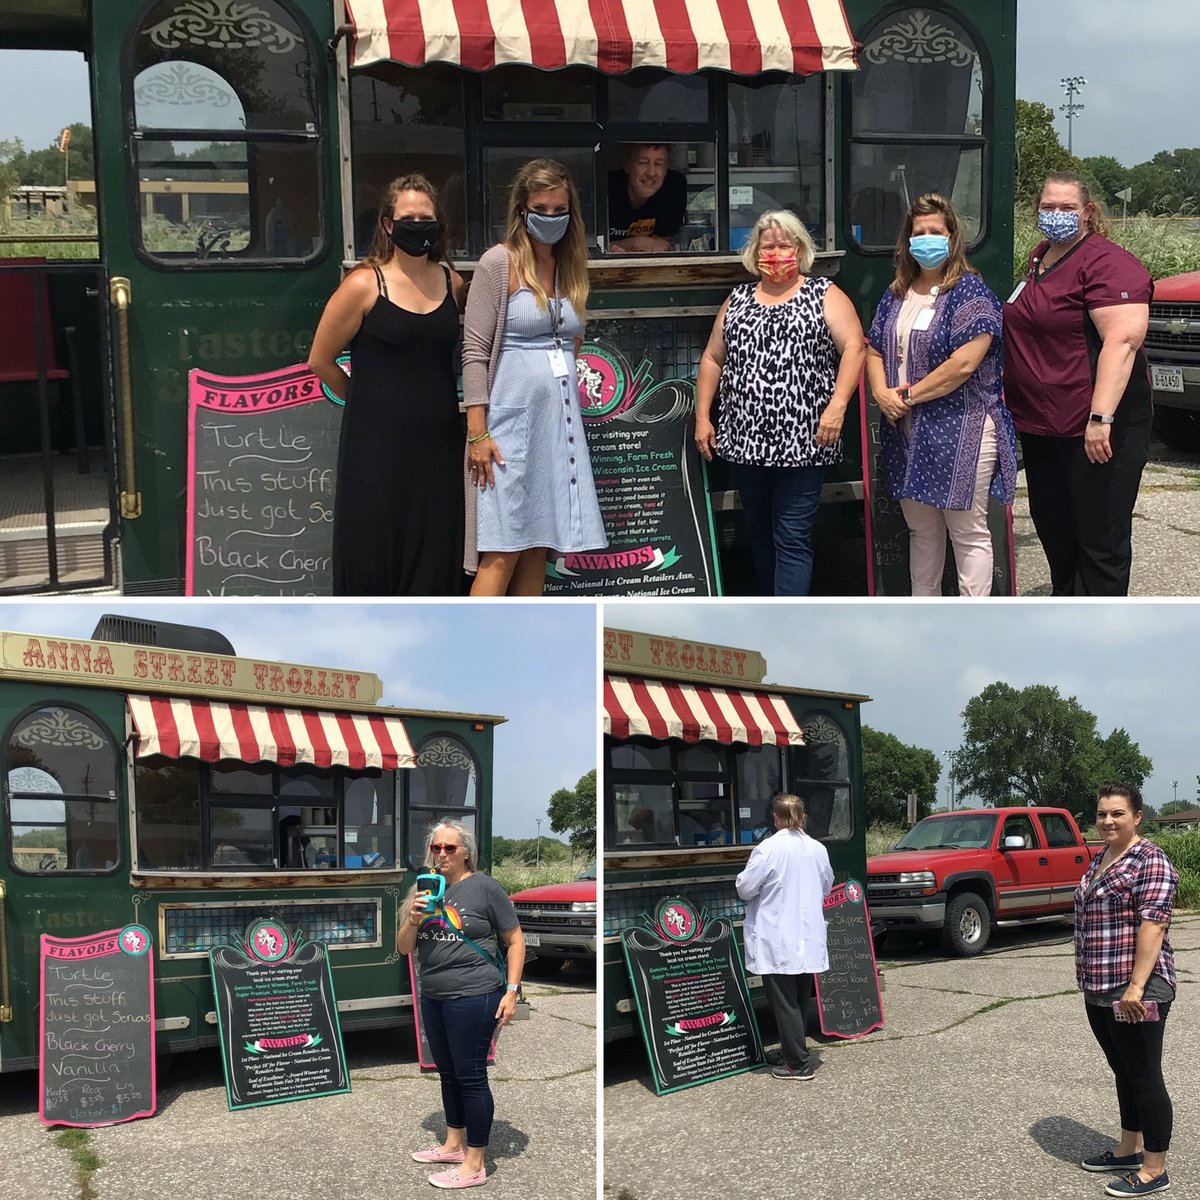 We had such a nice time when the Anna Street Trolley came to our parking lot at #AzriaHealthCentralCity! Several of us enjoyed delicious bowls of ice cream, and we loved seeing all the visitors! Thank you to everyone who stopped by!

#AzriaHealth #AnnaStreetTrolley #IceCream